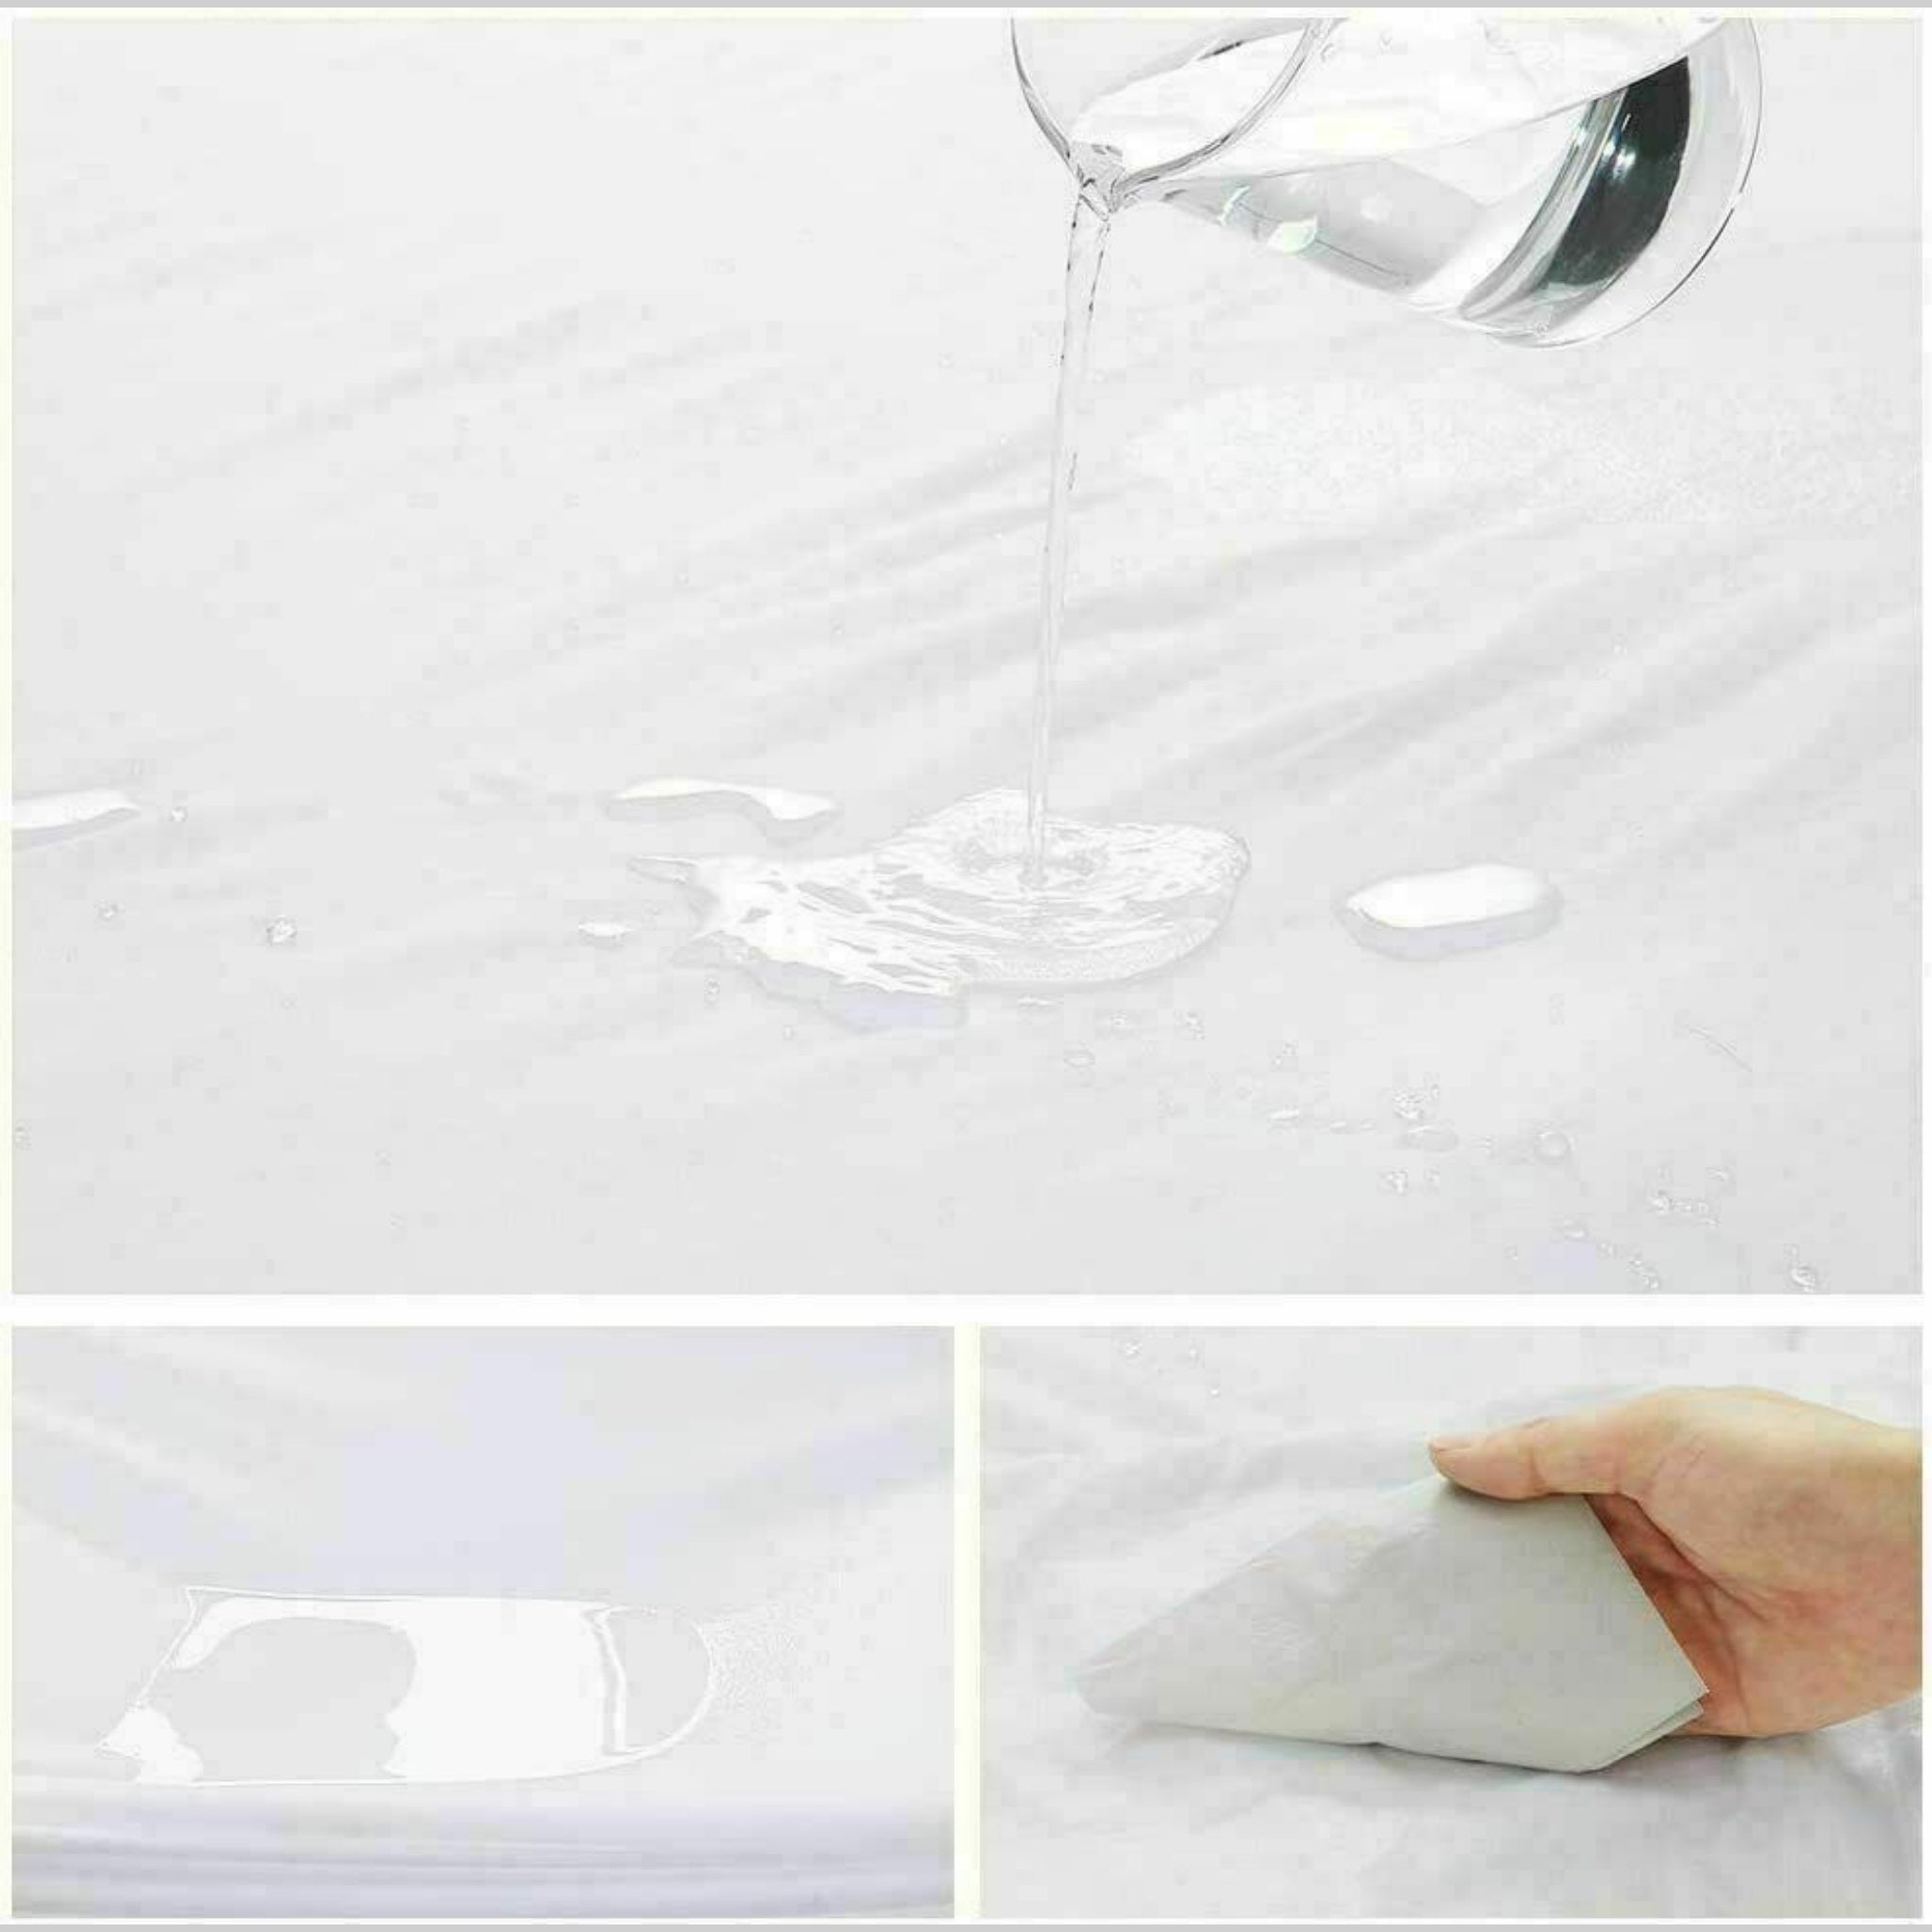 Beclen Harp New Single Waterproof Mattress Protector Anti bed Bug Cover Fitted Wet Sheet Nursery Bedding